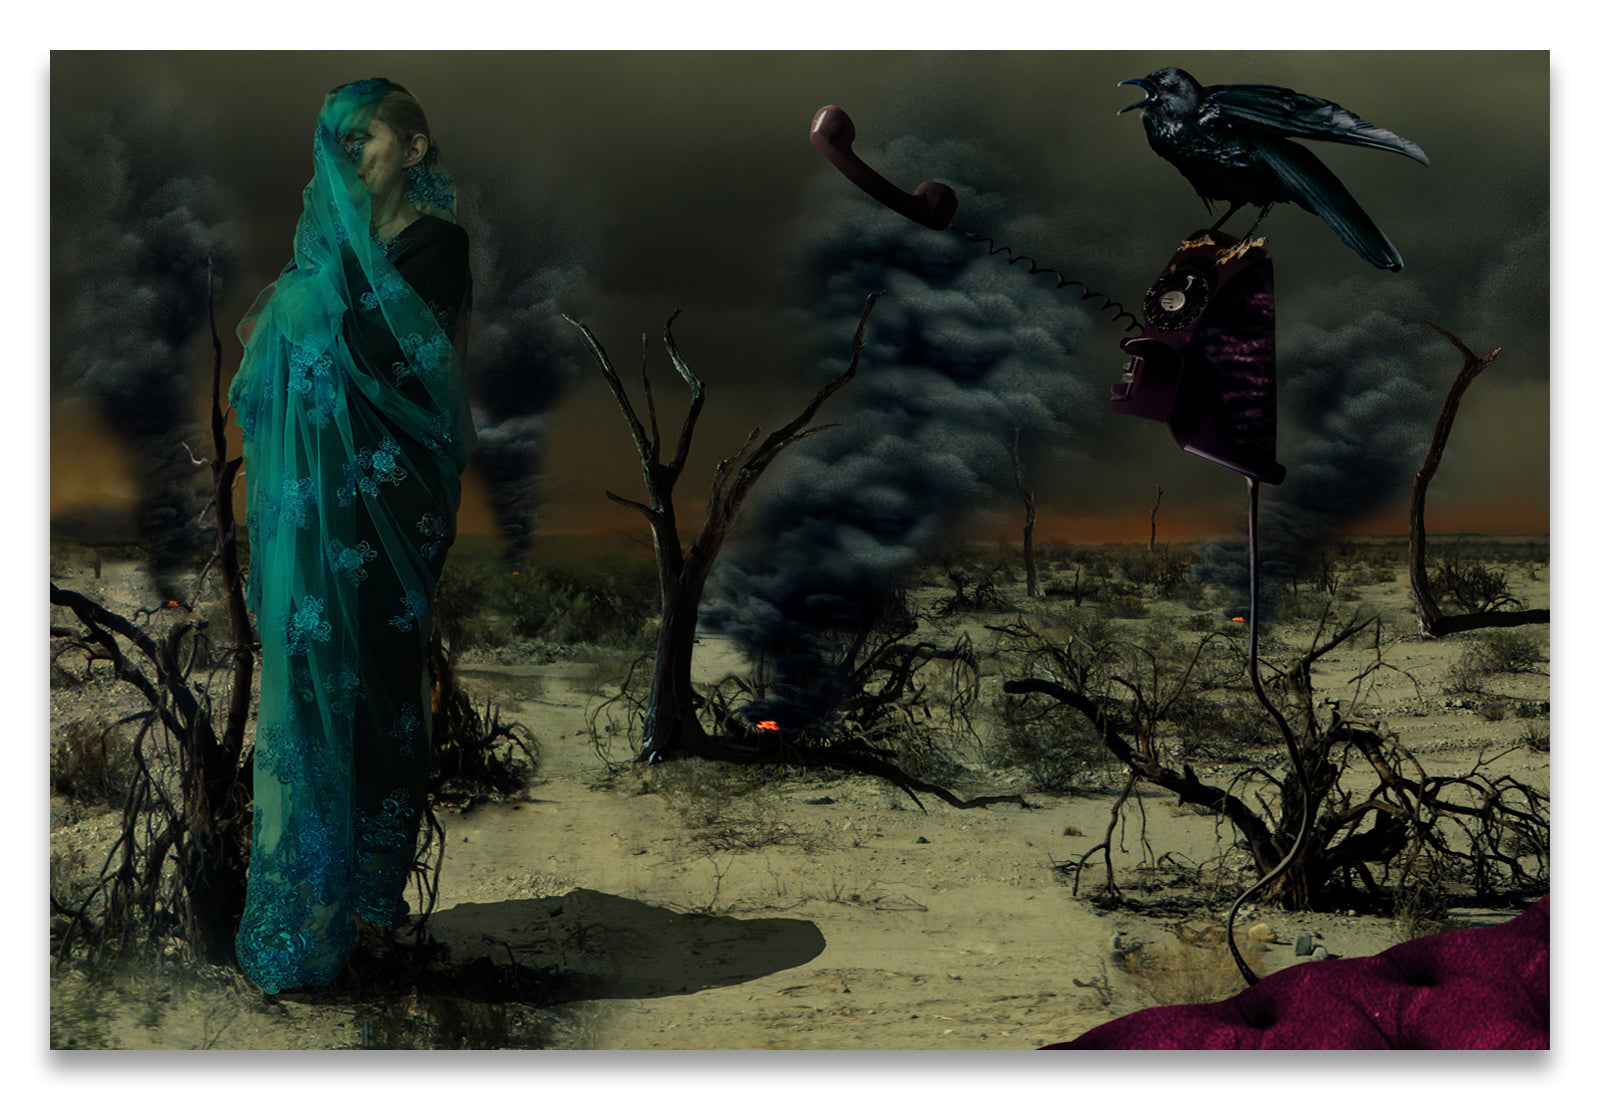 Mother Wrapped in Byzantine Blue Lace Fabric in an Apocalyptic setting with Spot Fires in the Background and a Crow Perched on an Analog, off the hook, Phone- Fine Art Print